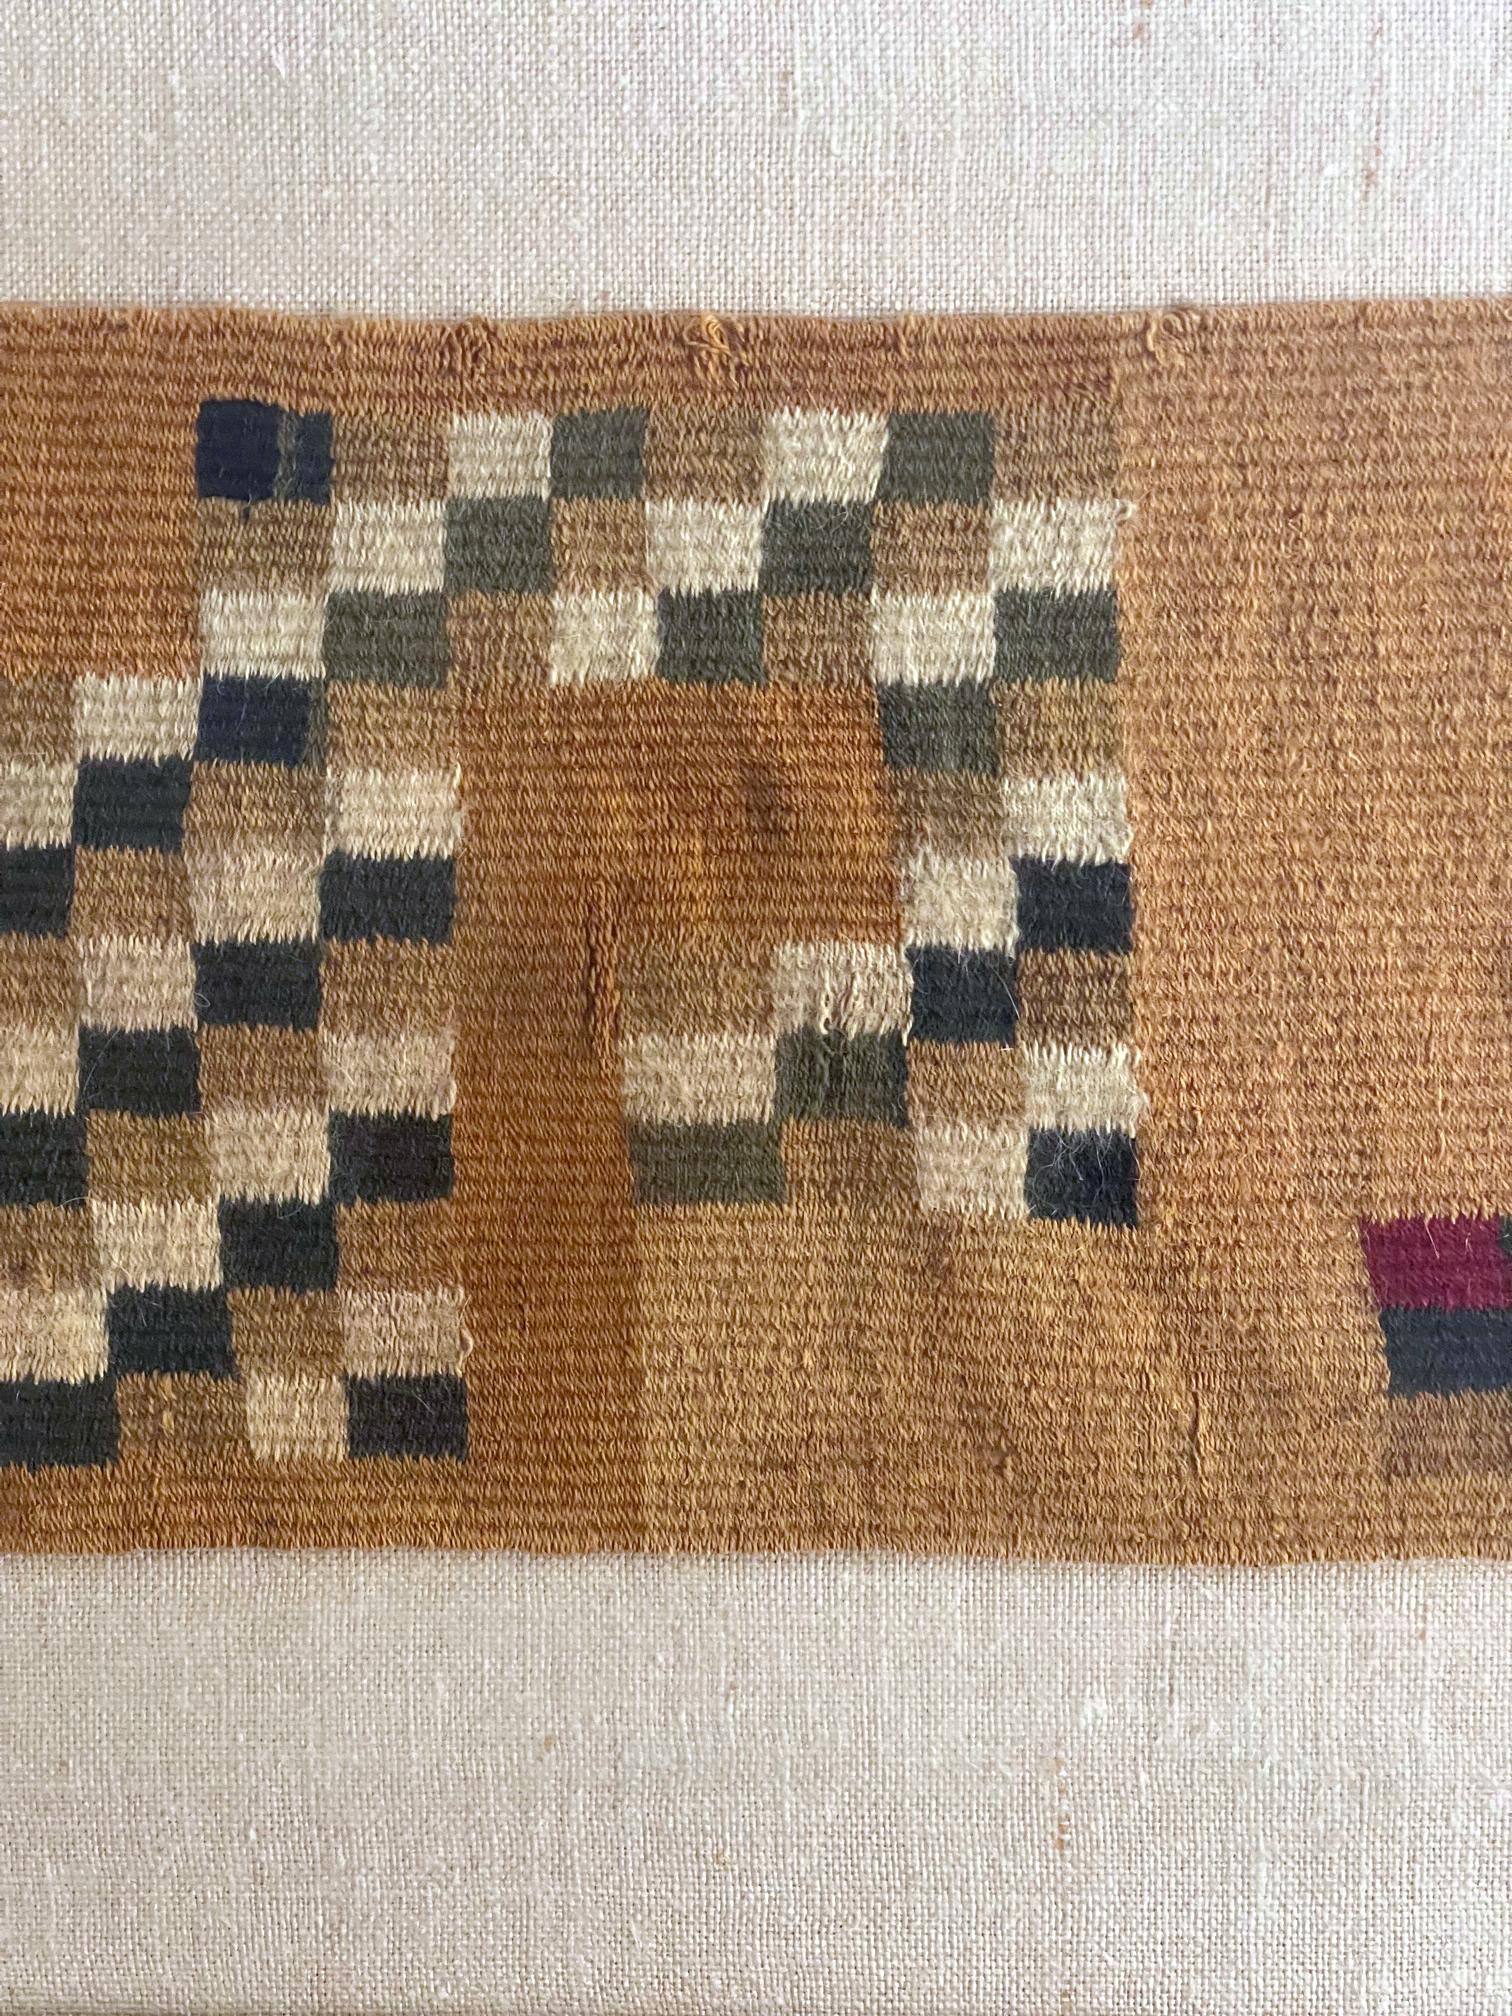 18th Century and Earlier Two Frame Pre-Columbian Woven Textile Fragments Inca Culture Peru For Sale